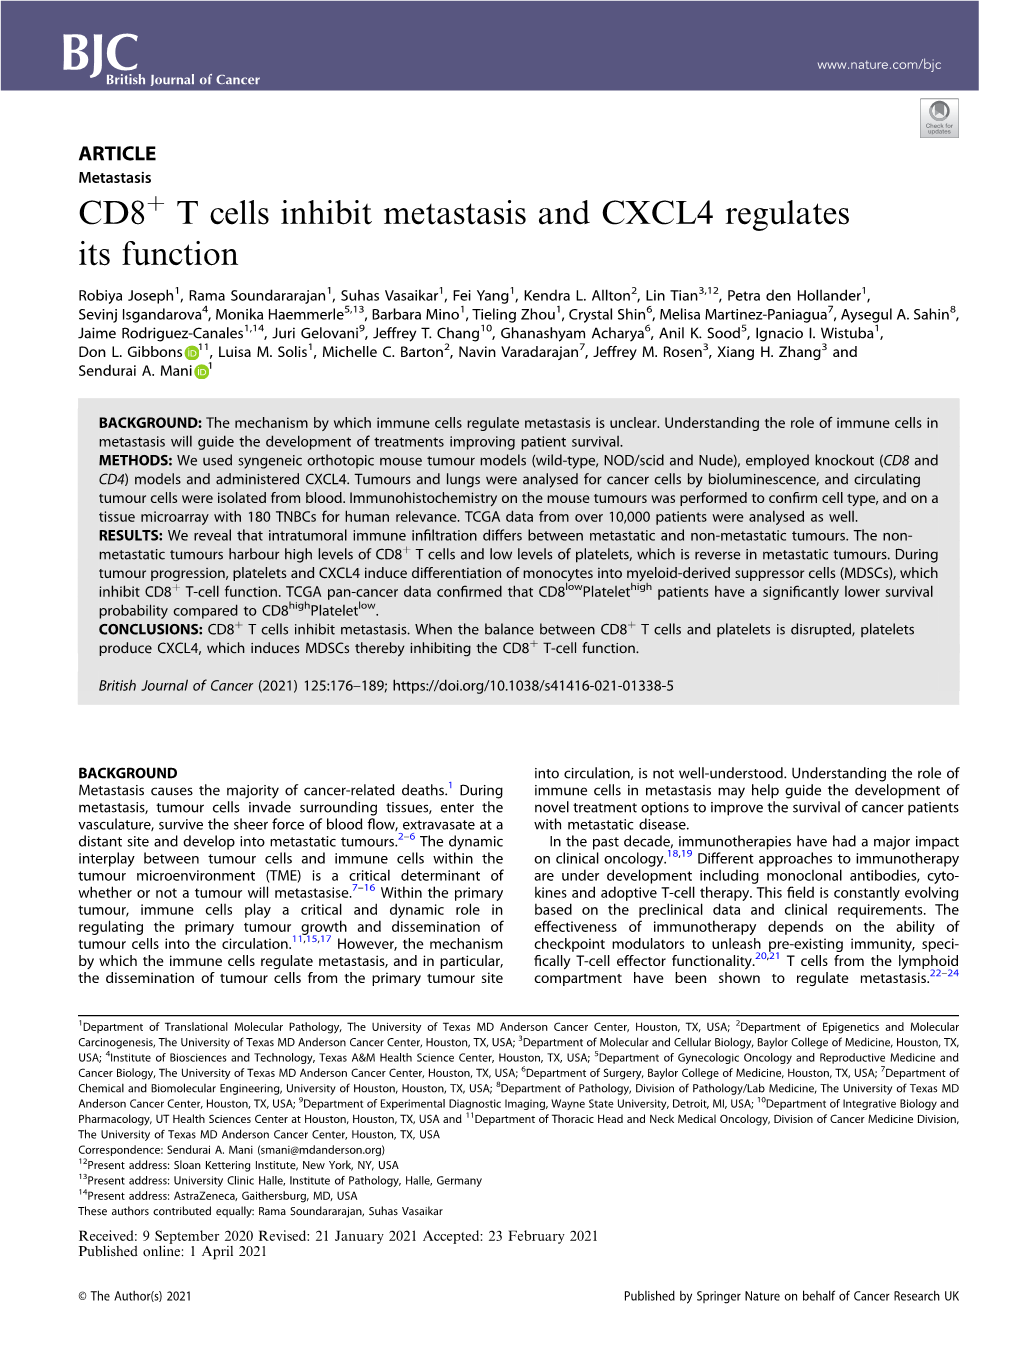 CD8+ T Cells Inhibit Metastasis and CXCL4 Regulates Its Function